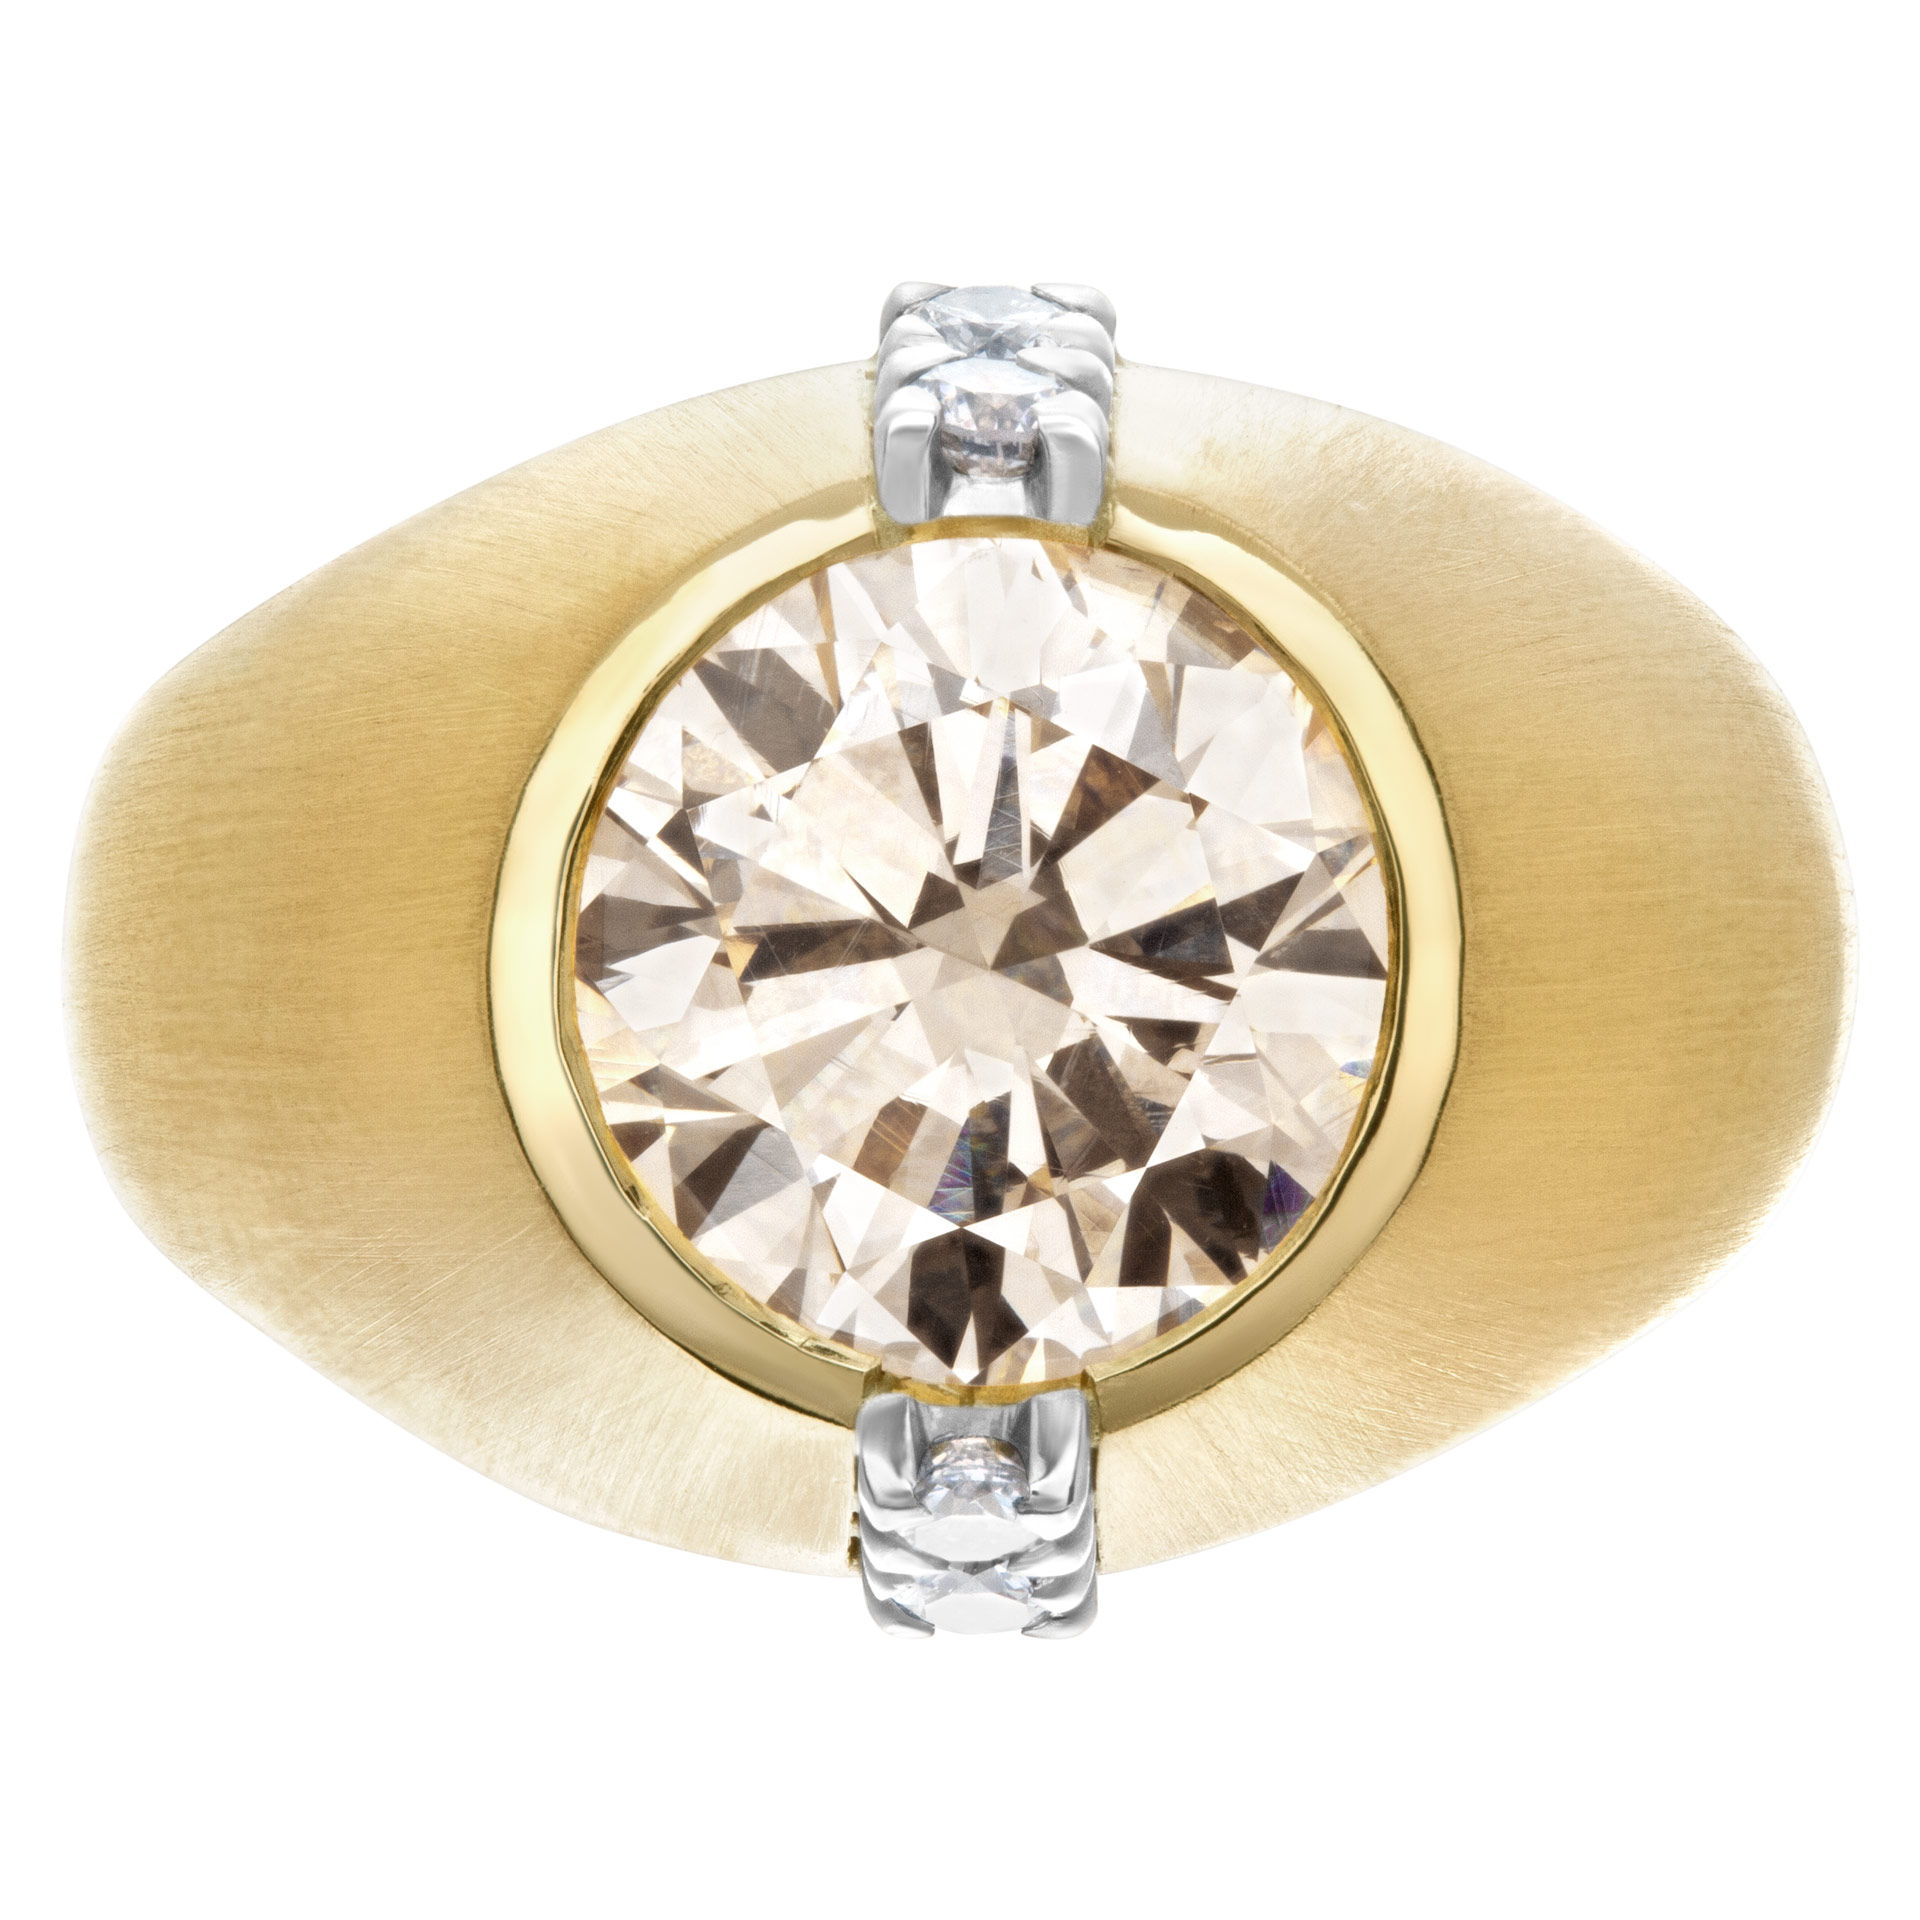 GIA Certified Kutchinsky diamond ring in 18k yellow gold. Warm and bright 4.23 carat center diamond champgane color, VS1 clarity image 1